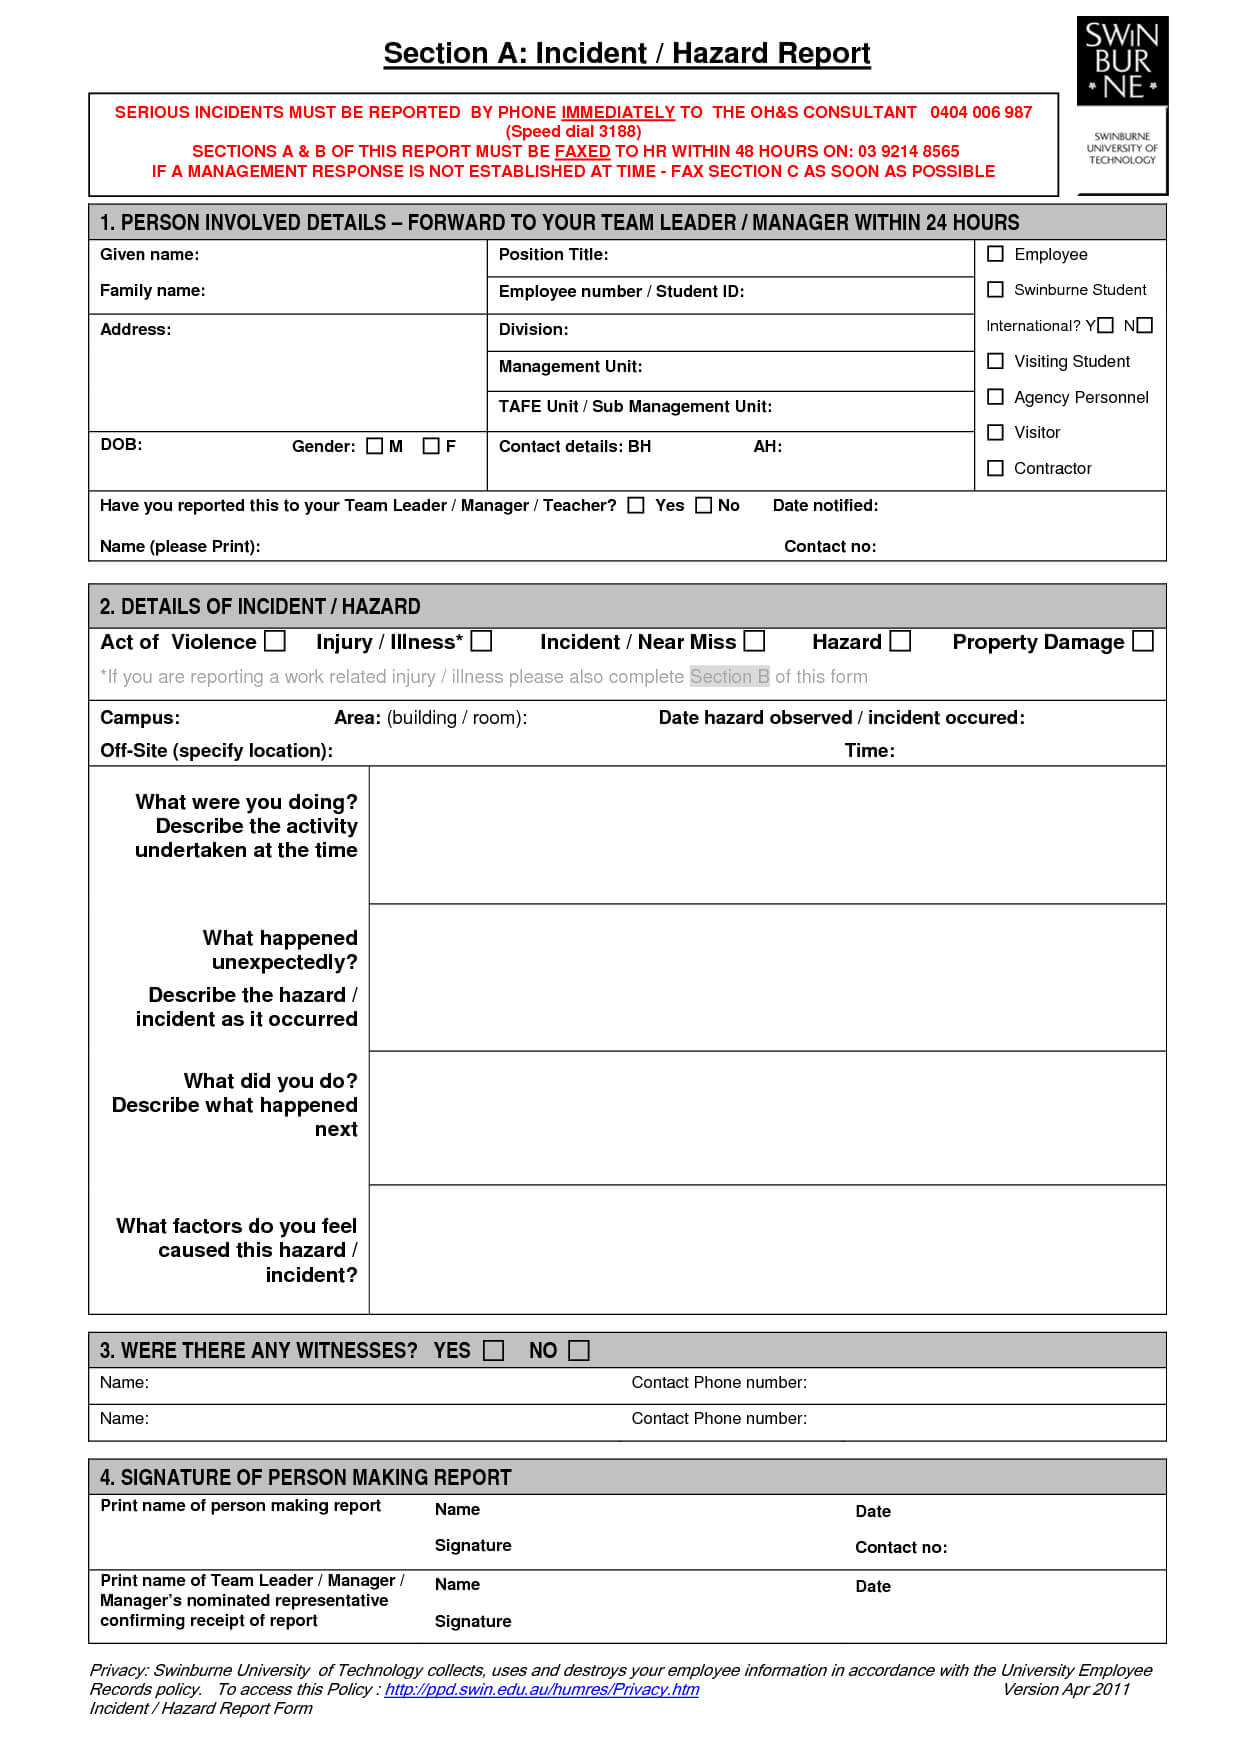 Technology Incident Report Template And Incident Report With Regard To Incident Hazard Report Form Template